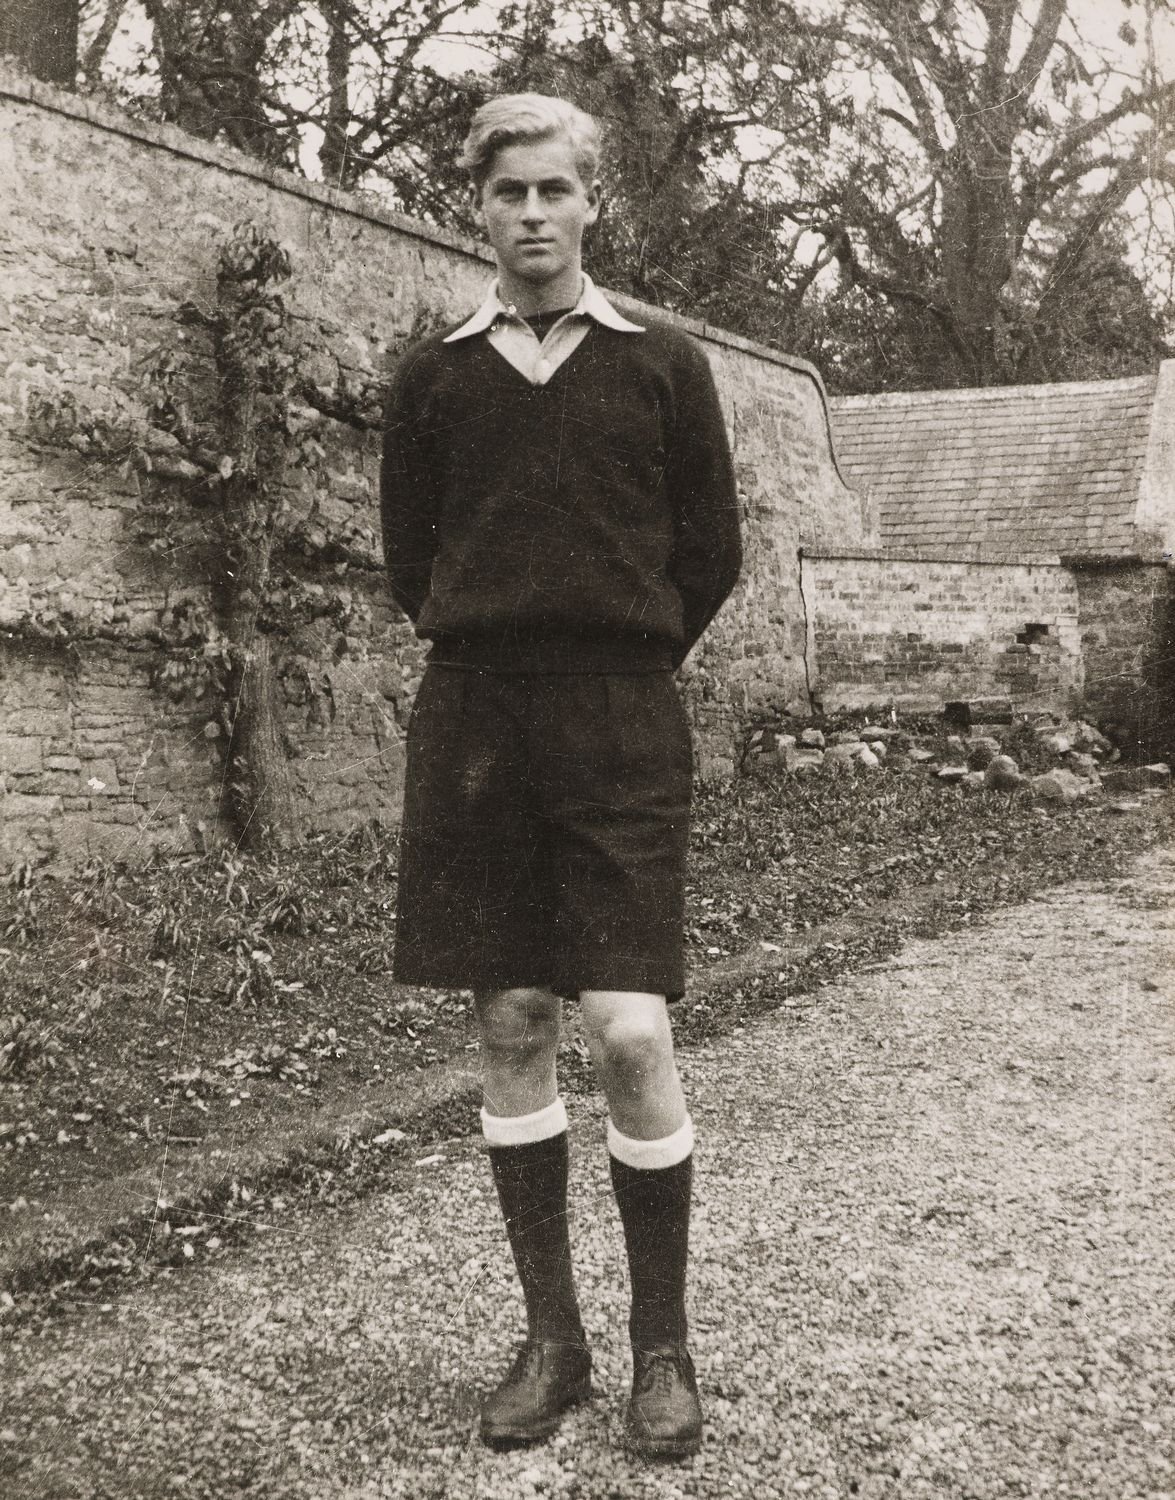 Photograph of Prince Philip, later HRH The Duke of Edinburgh, facing the viewer. He stands in a field and wears football kit. Photograph taken at Gordounstoun school.